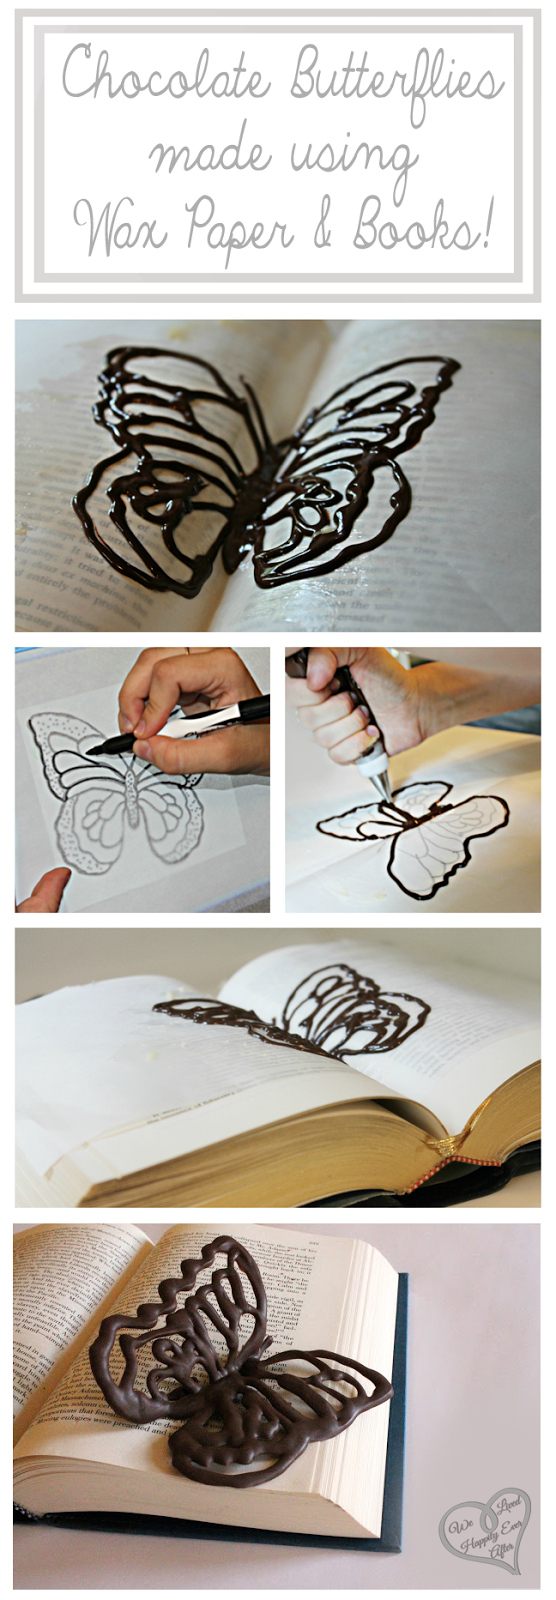 Make Chocolate Butterflies Using WAX Paper and Books! The Books make the butterf